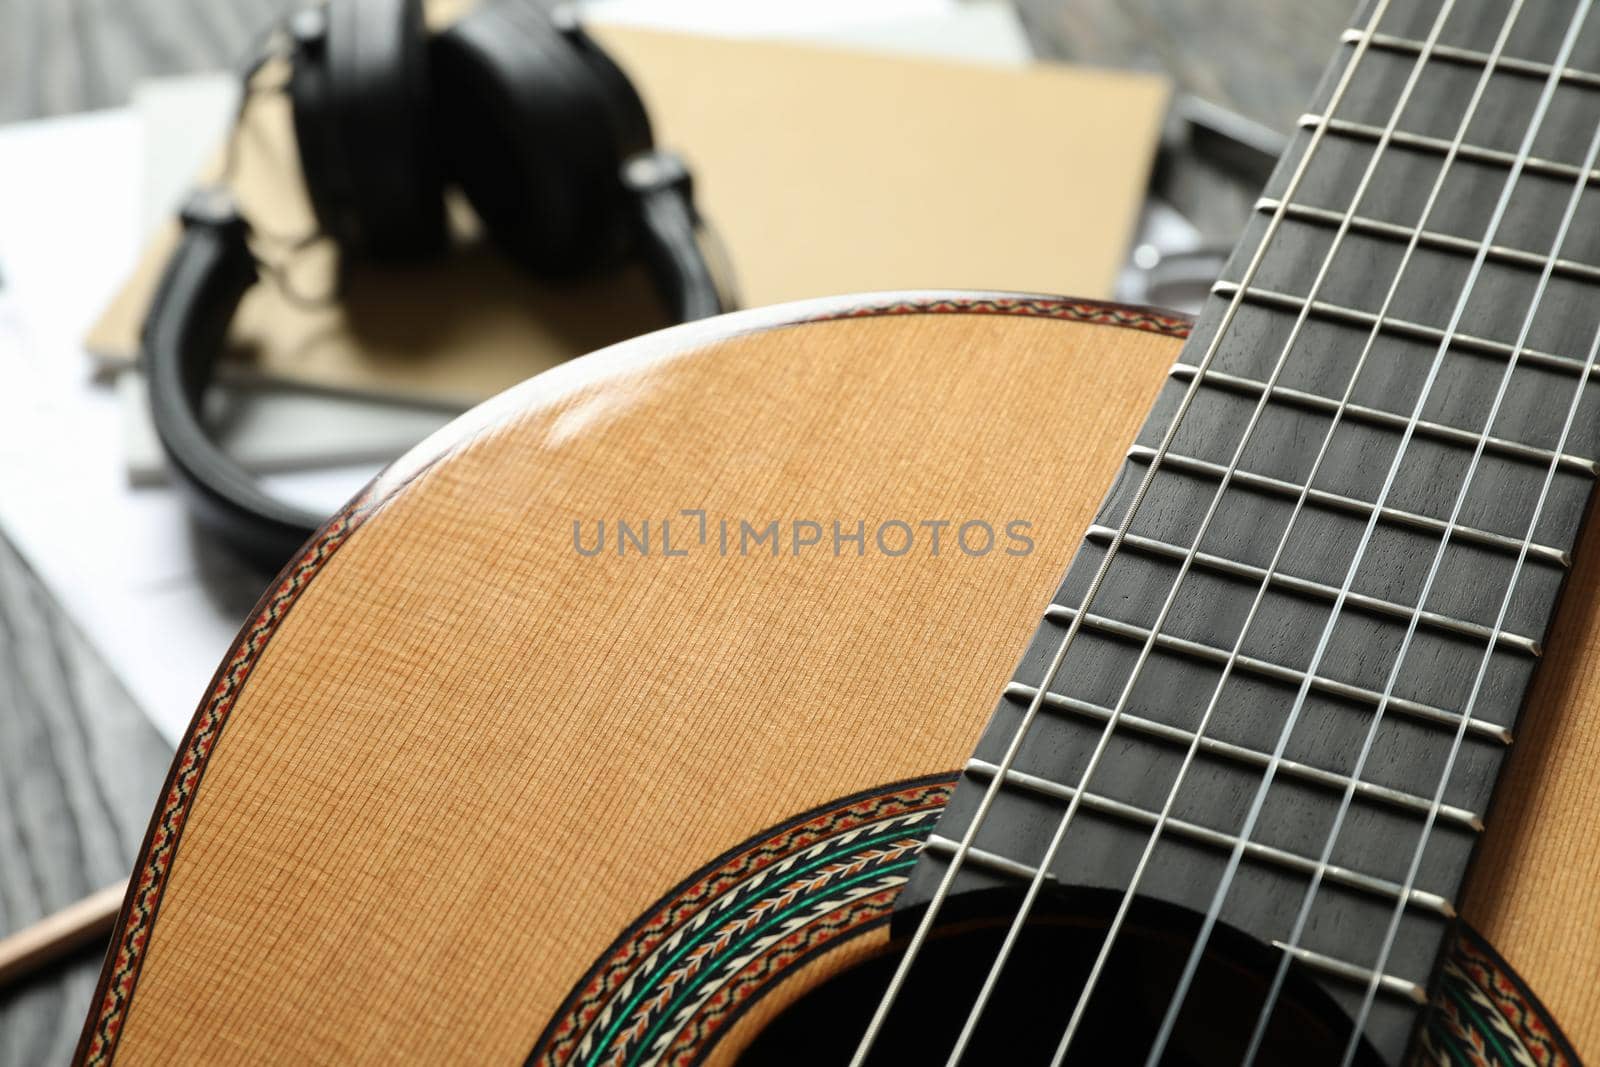 Classic guitar and music maker accessories against wooden background, closeup